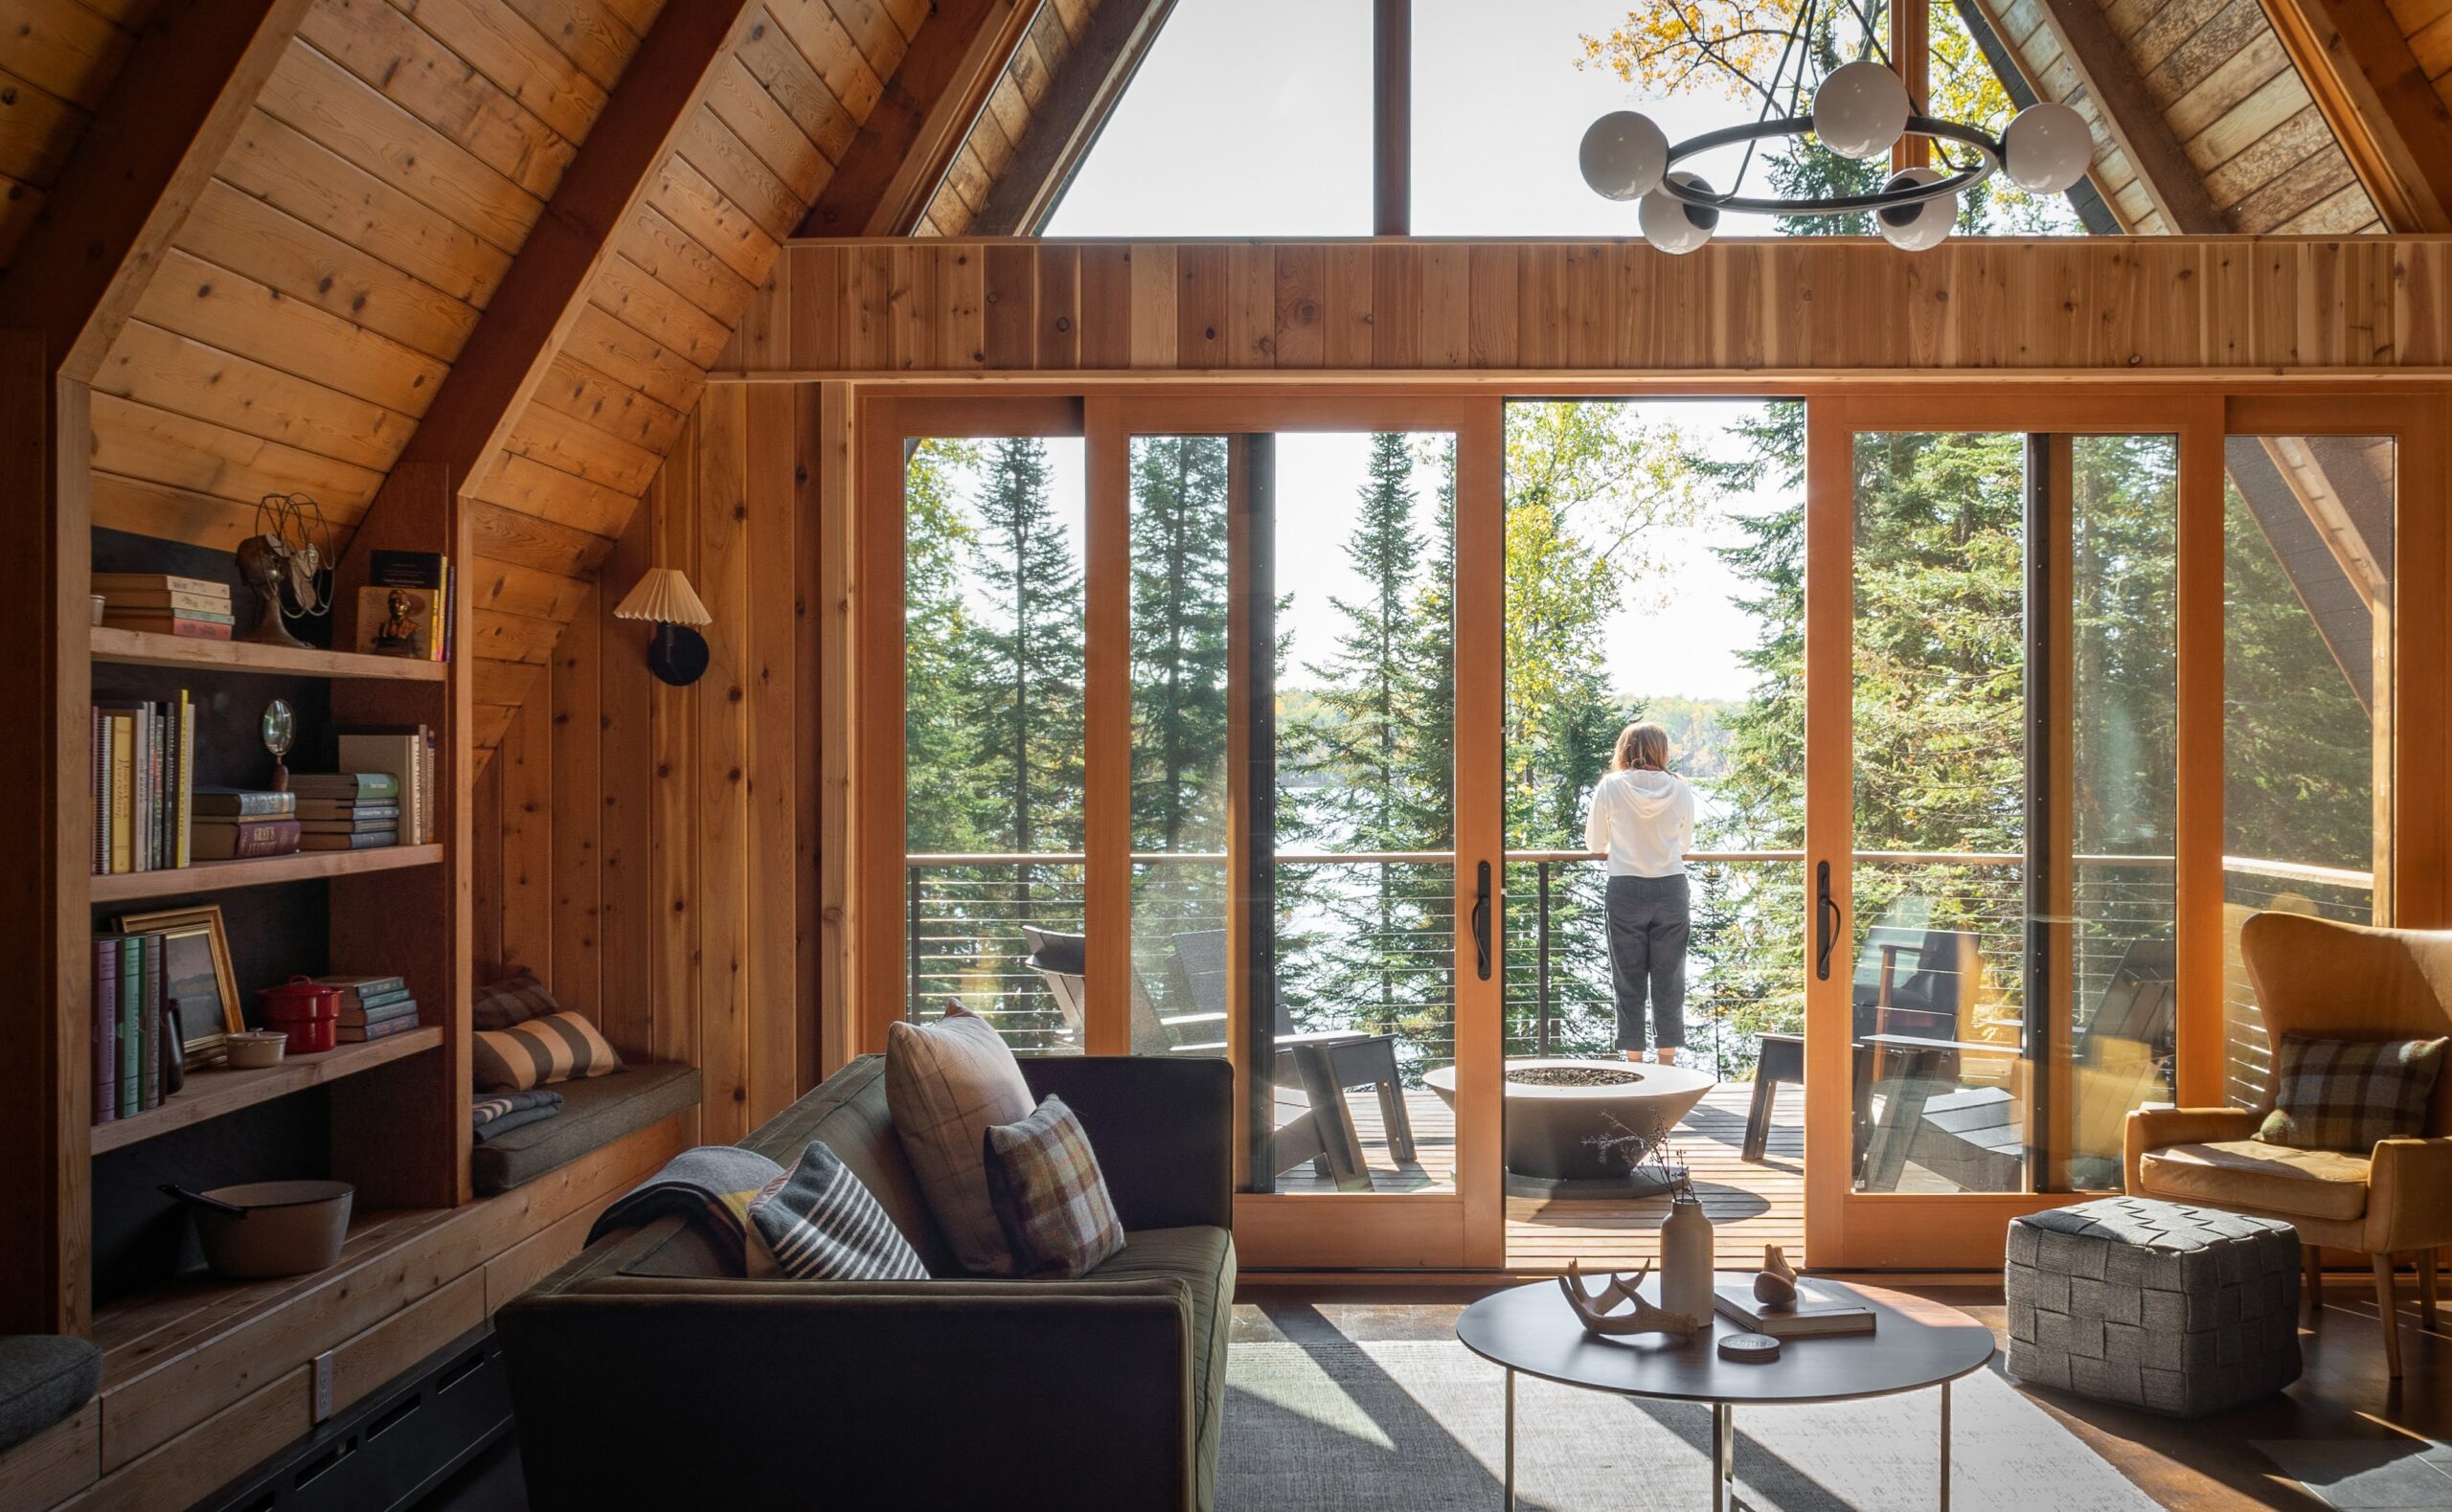 View of the wooded backyard from a living room of The Minne Stuga Cabin in Grand Marais Minnesota prominently featuring Kebony modified wood siding throughout the houses' design